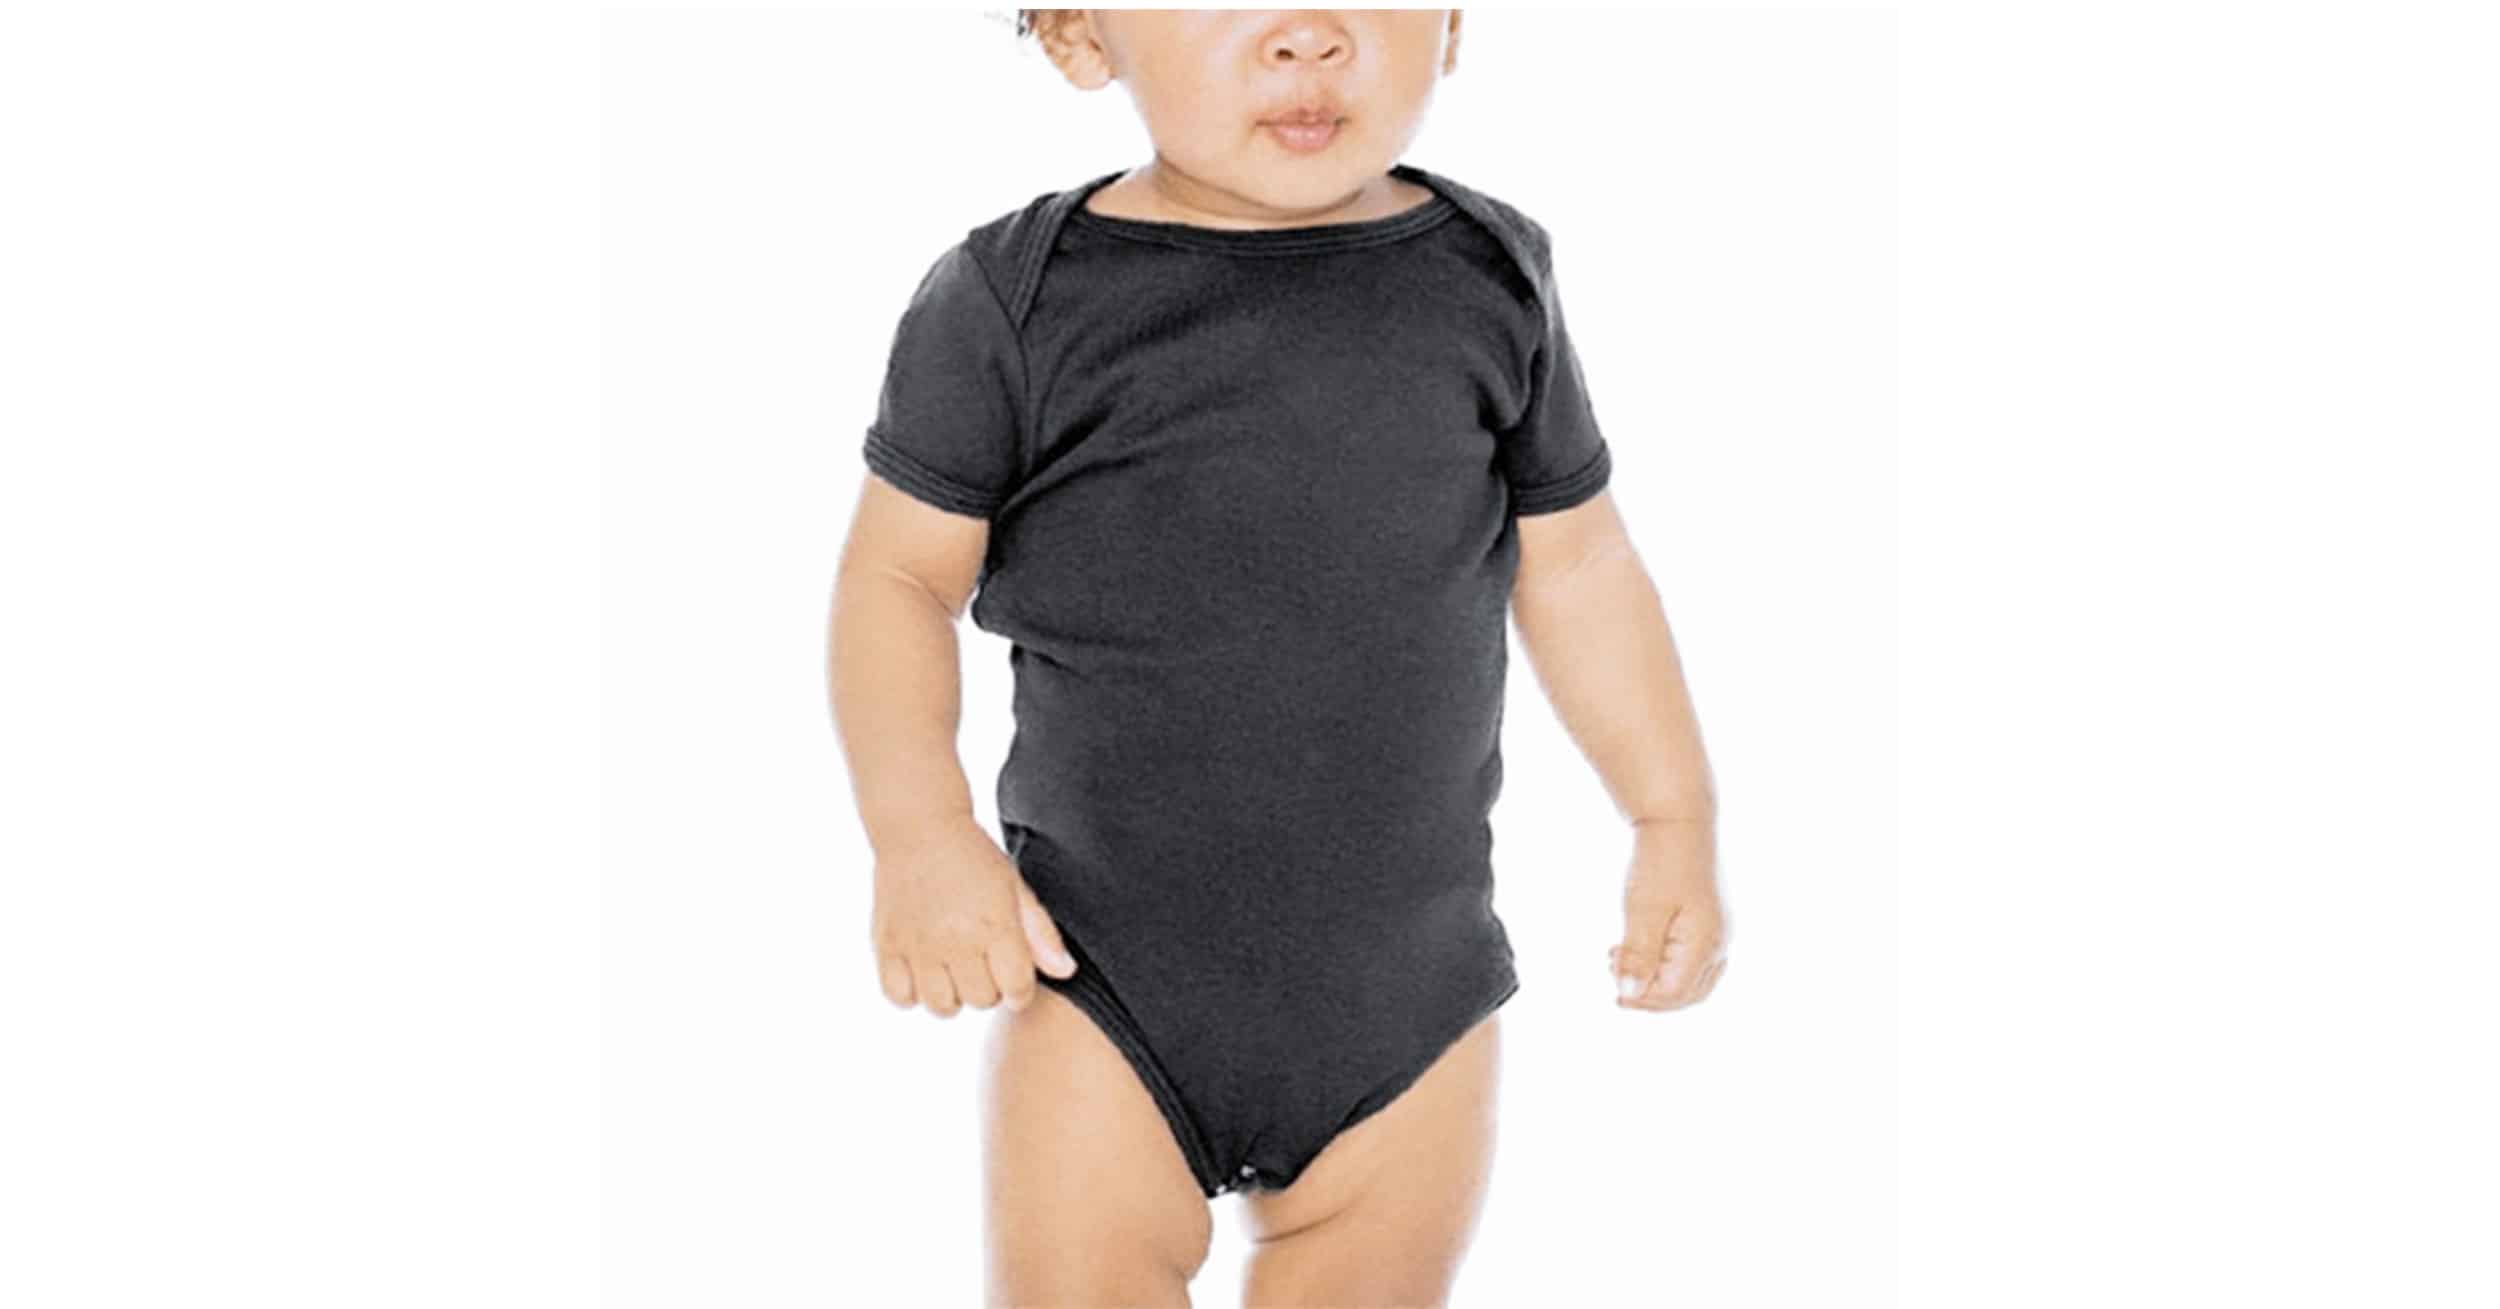 Print-on-Demand Baby Clothes